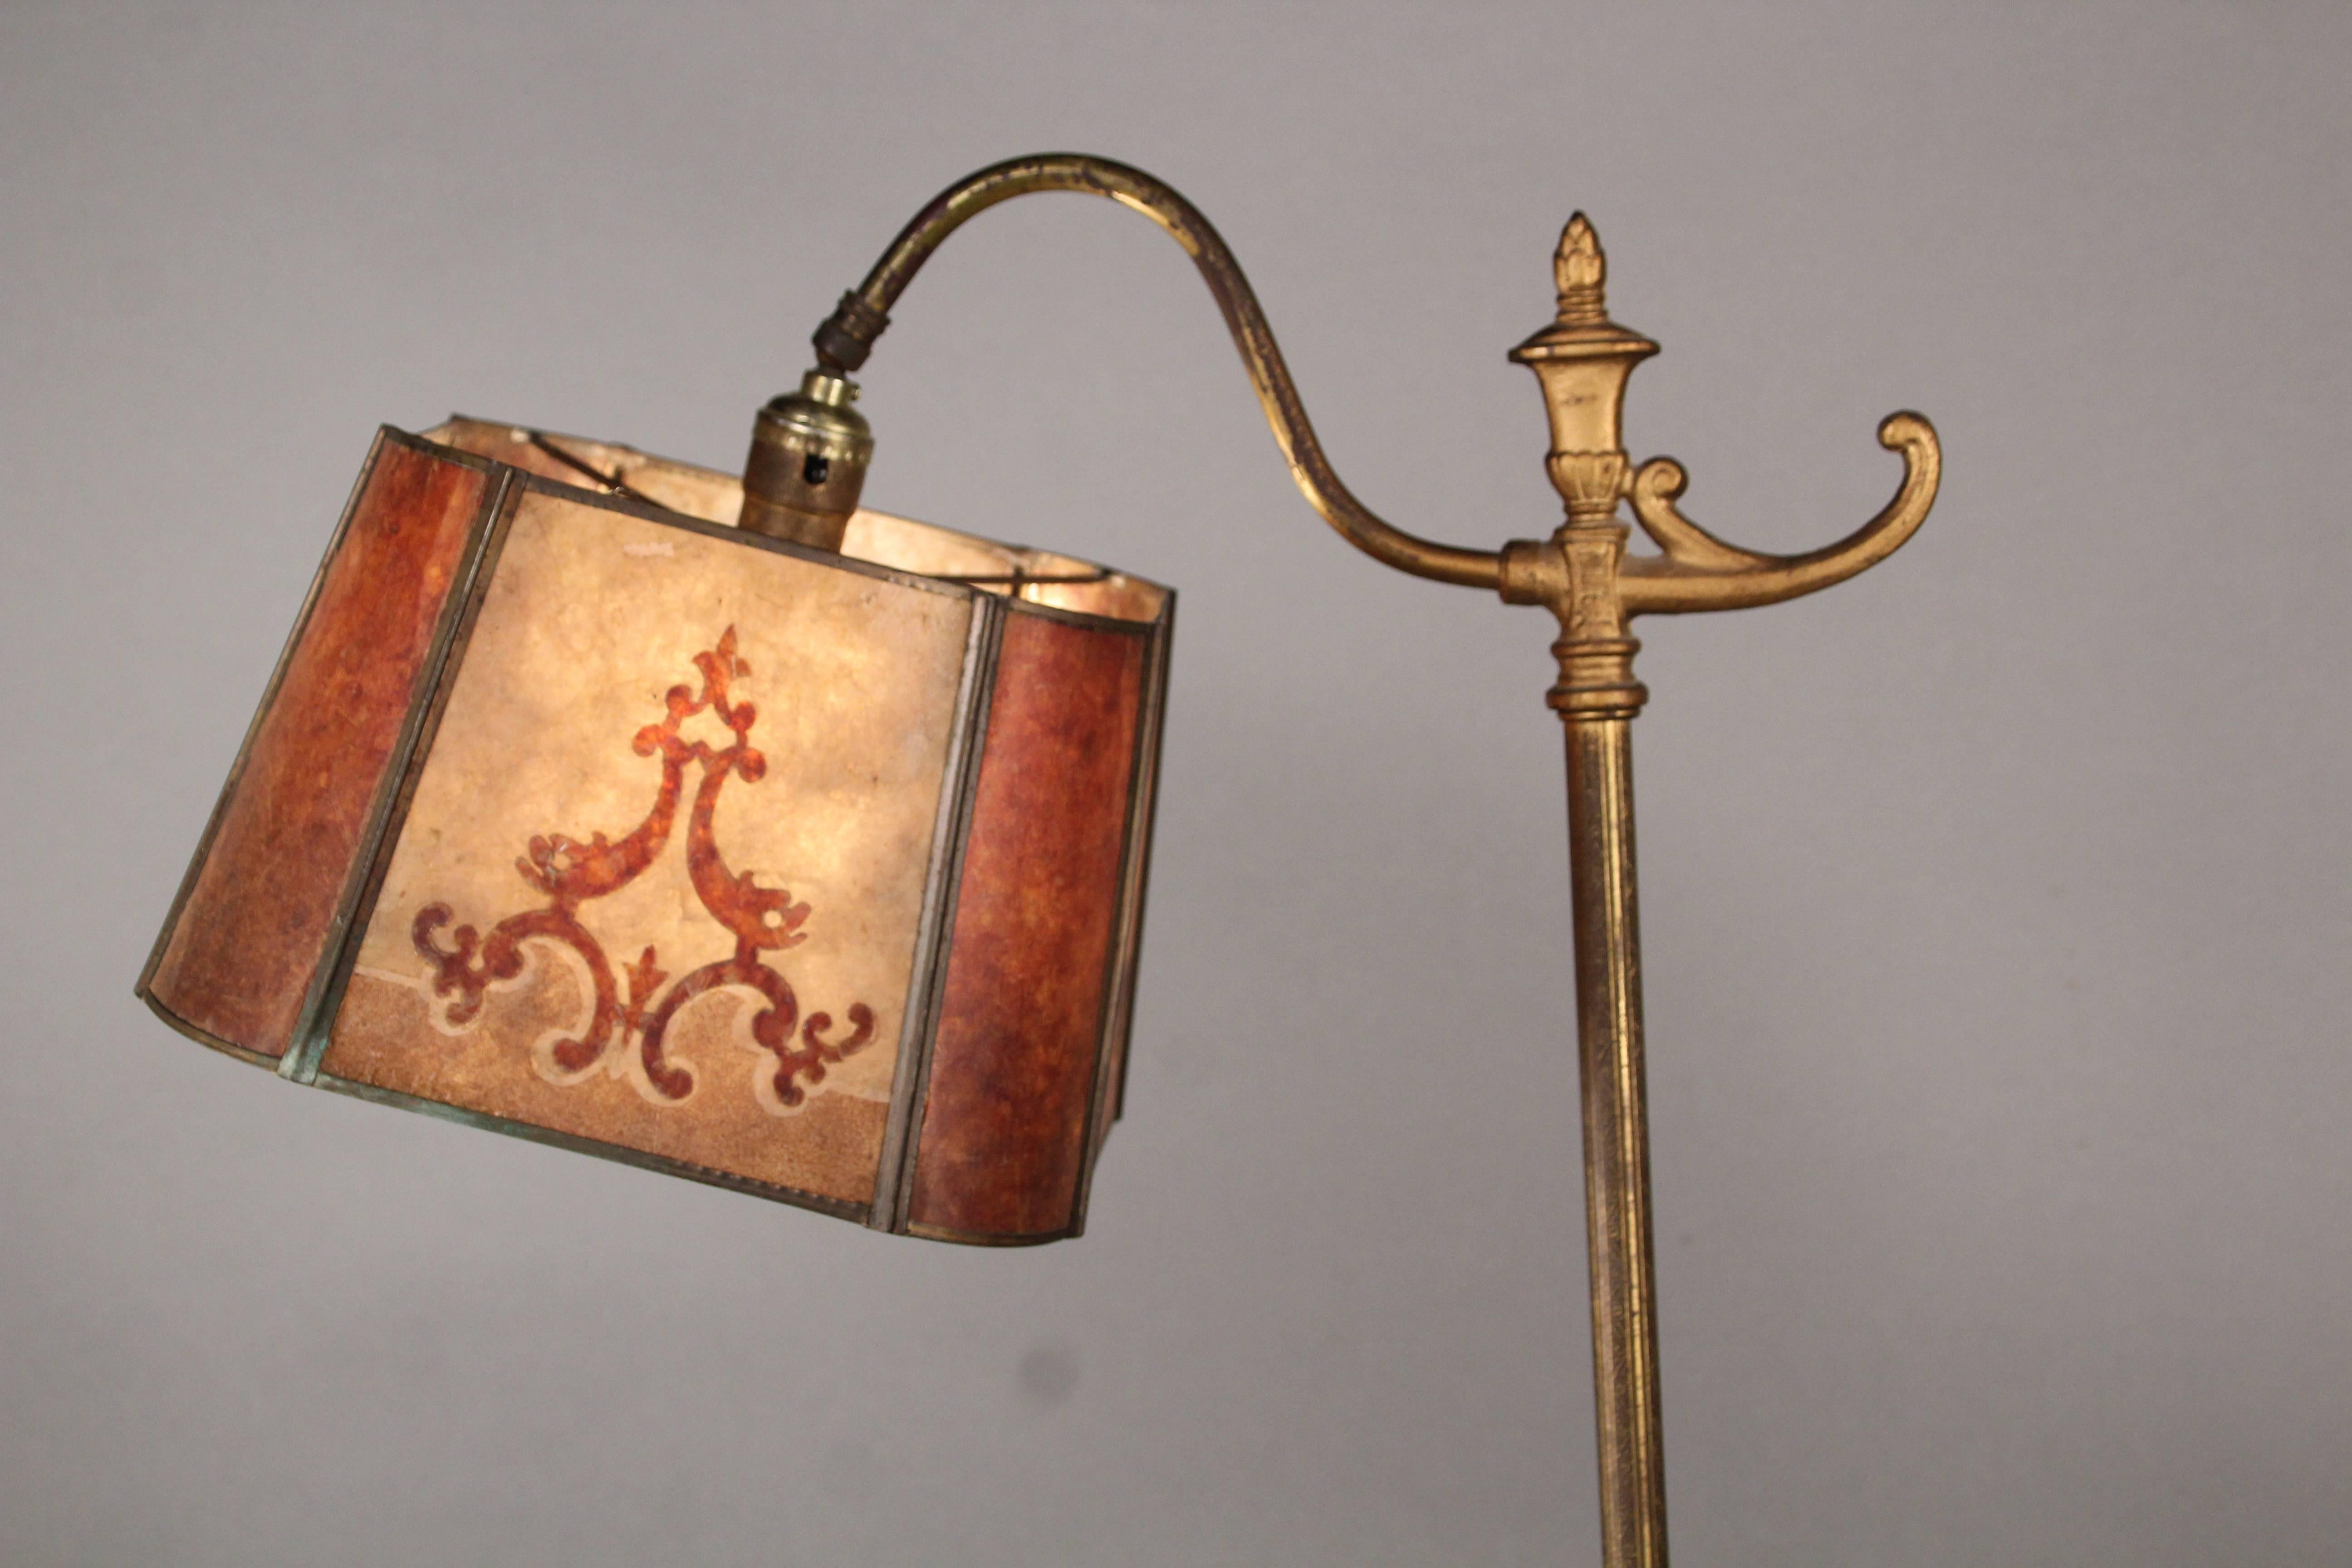 North American 1920s Floor Lamp with Two Color Mica Shade